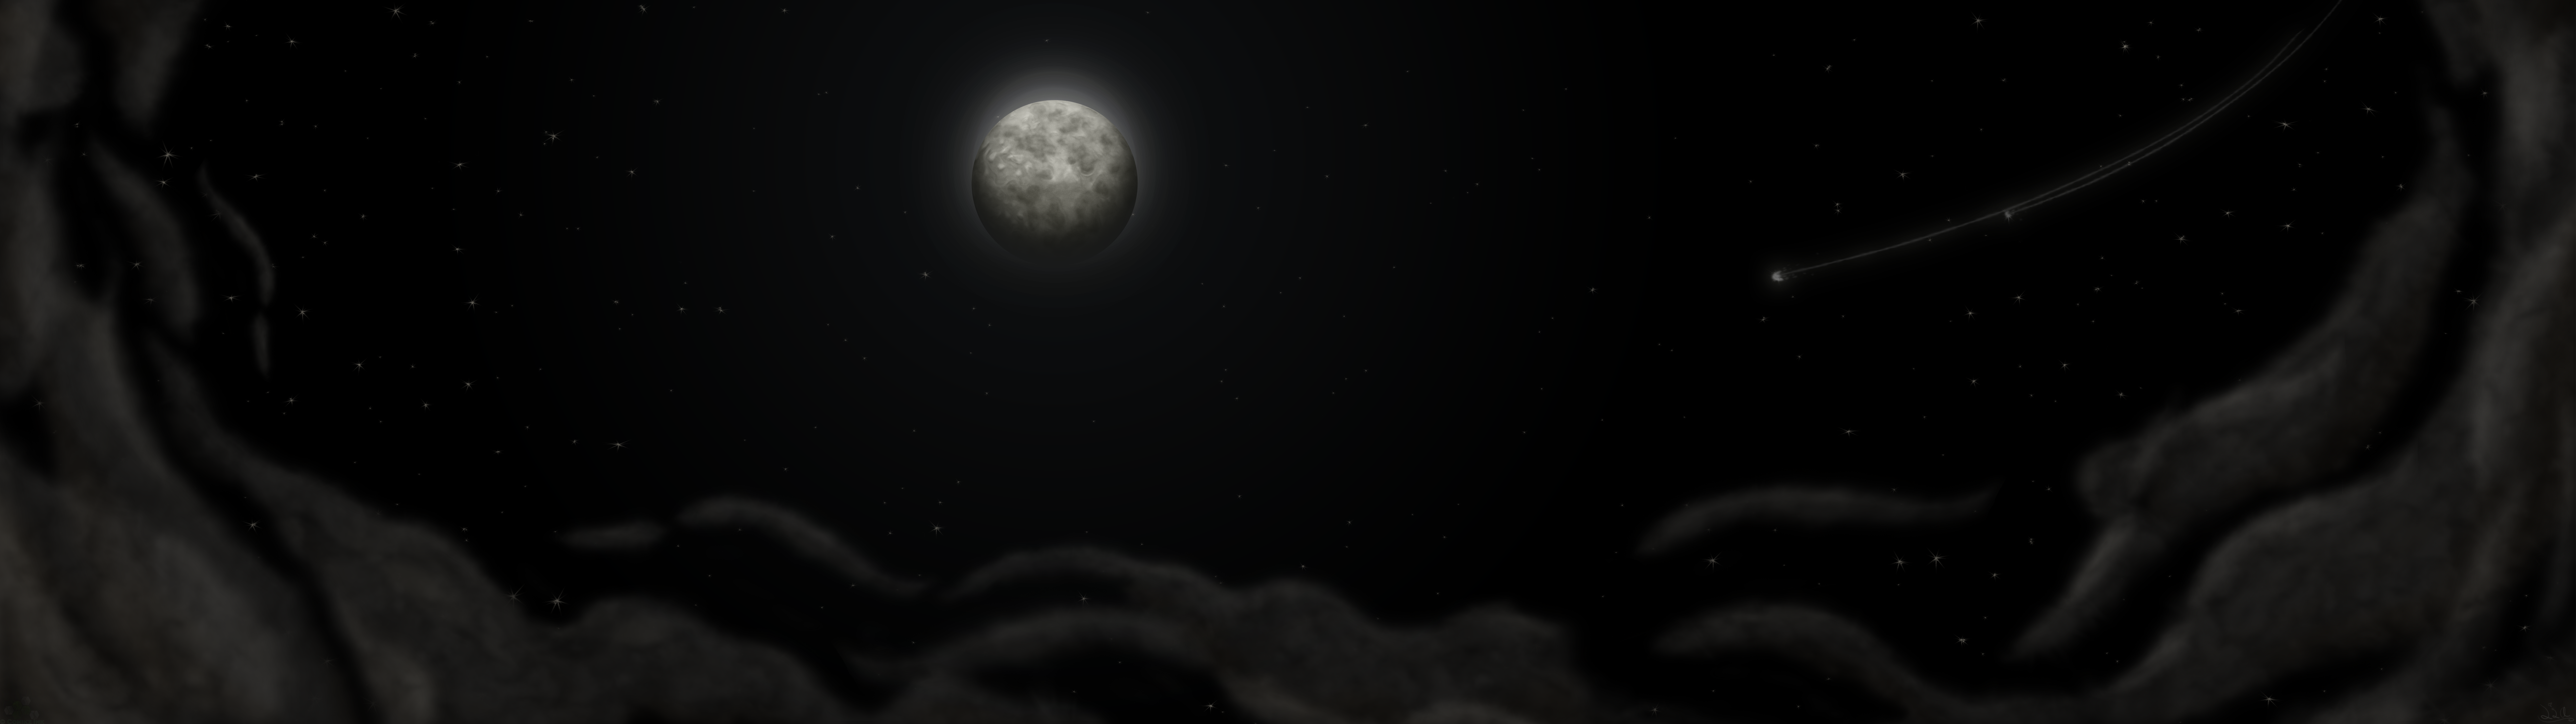 Moonlight [Dual 4K and 1080p 16:9 Wallpaper] by ComikzInk on ...